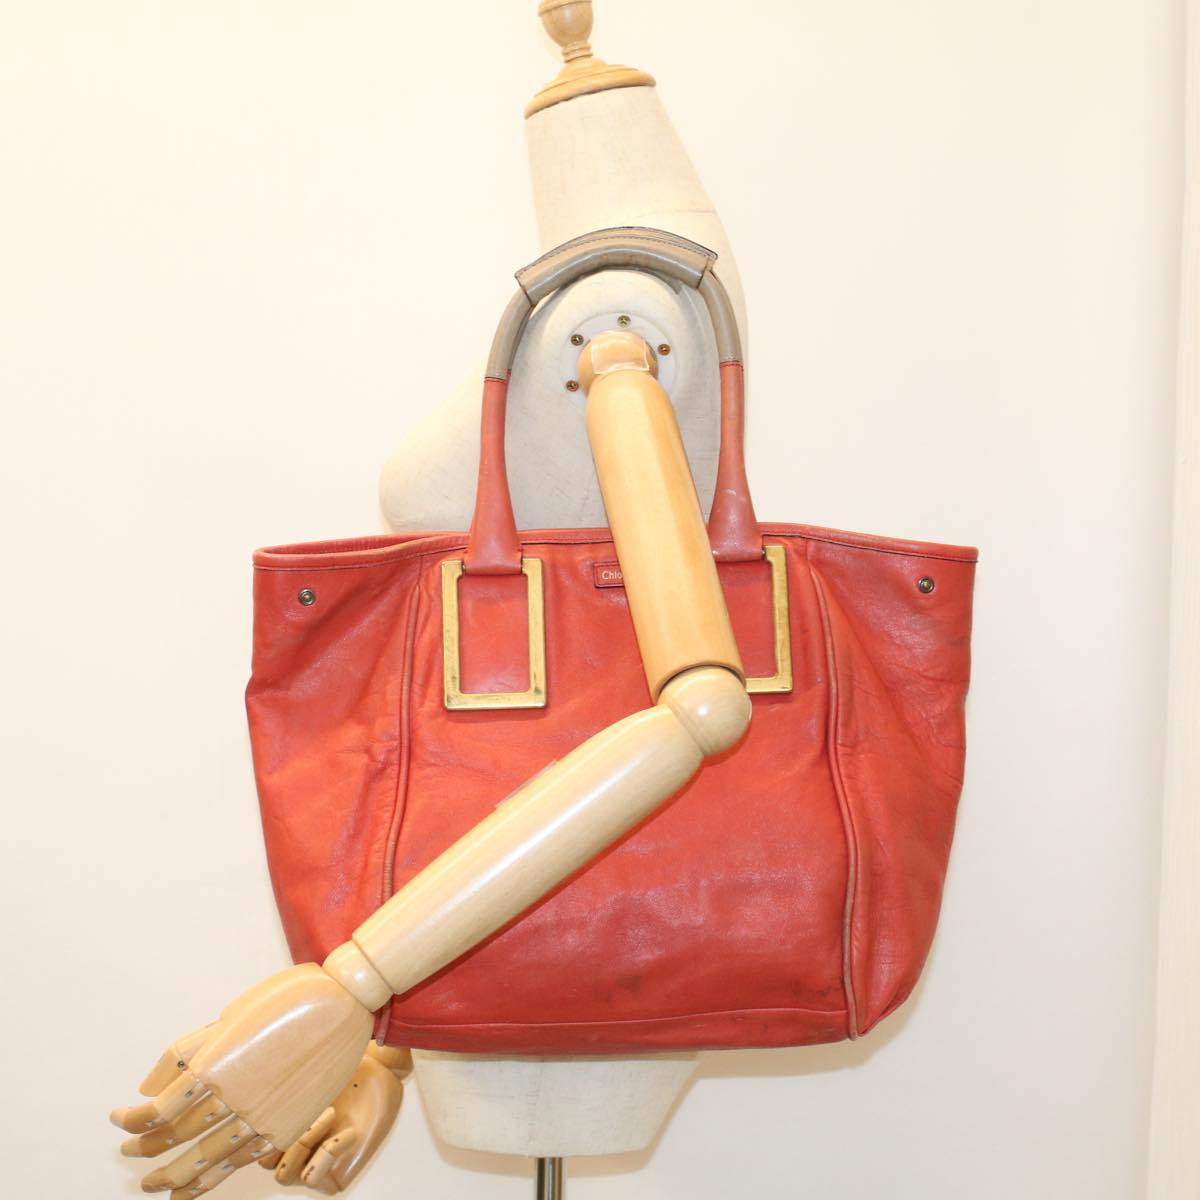 Chloe Etel Hand Bag Leather Red 04-12-50-65 Auth bs7428